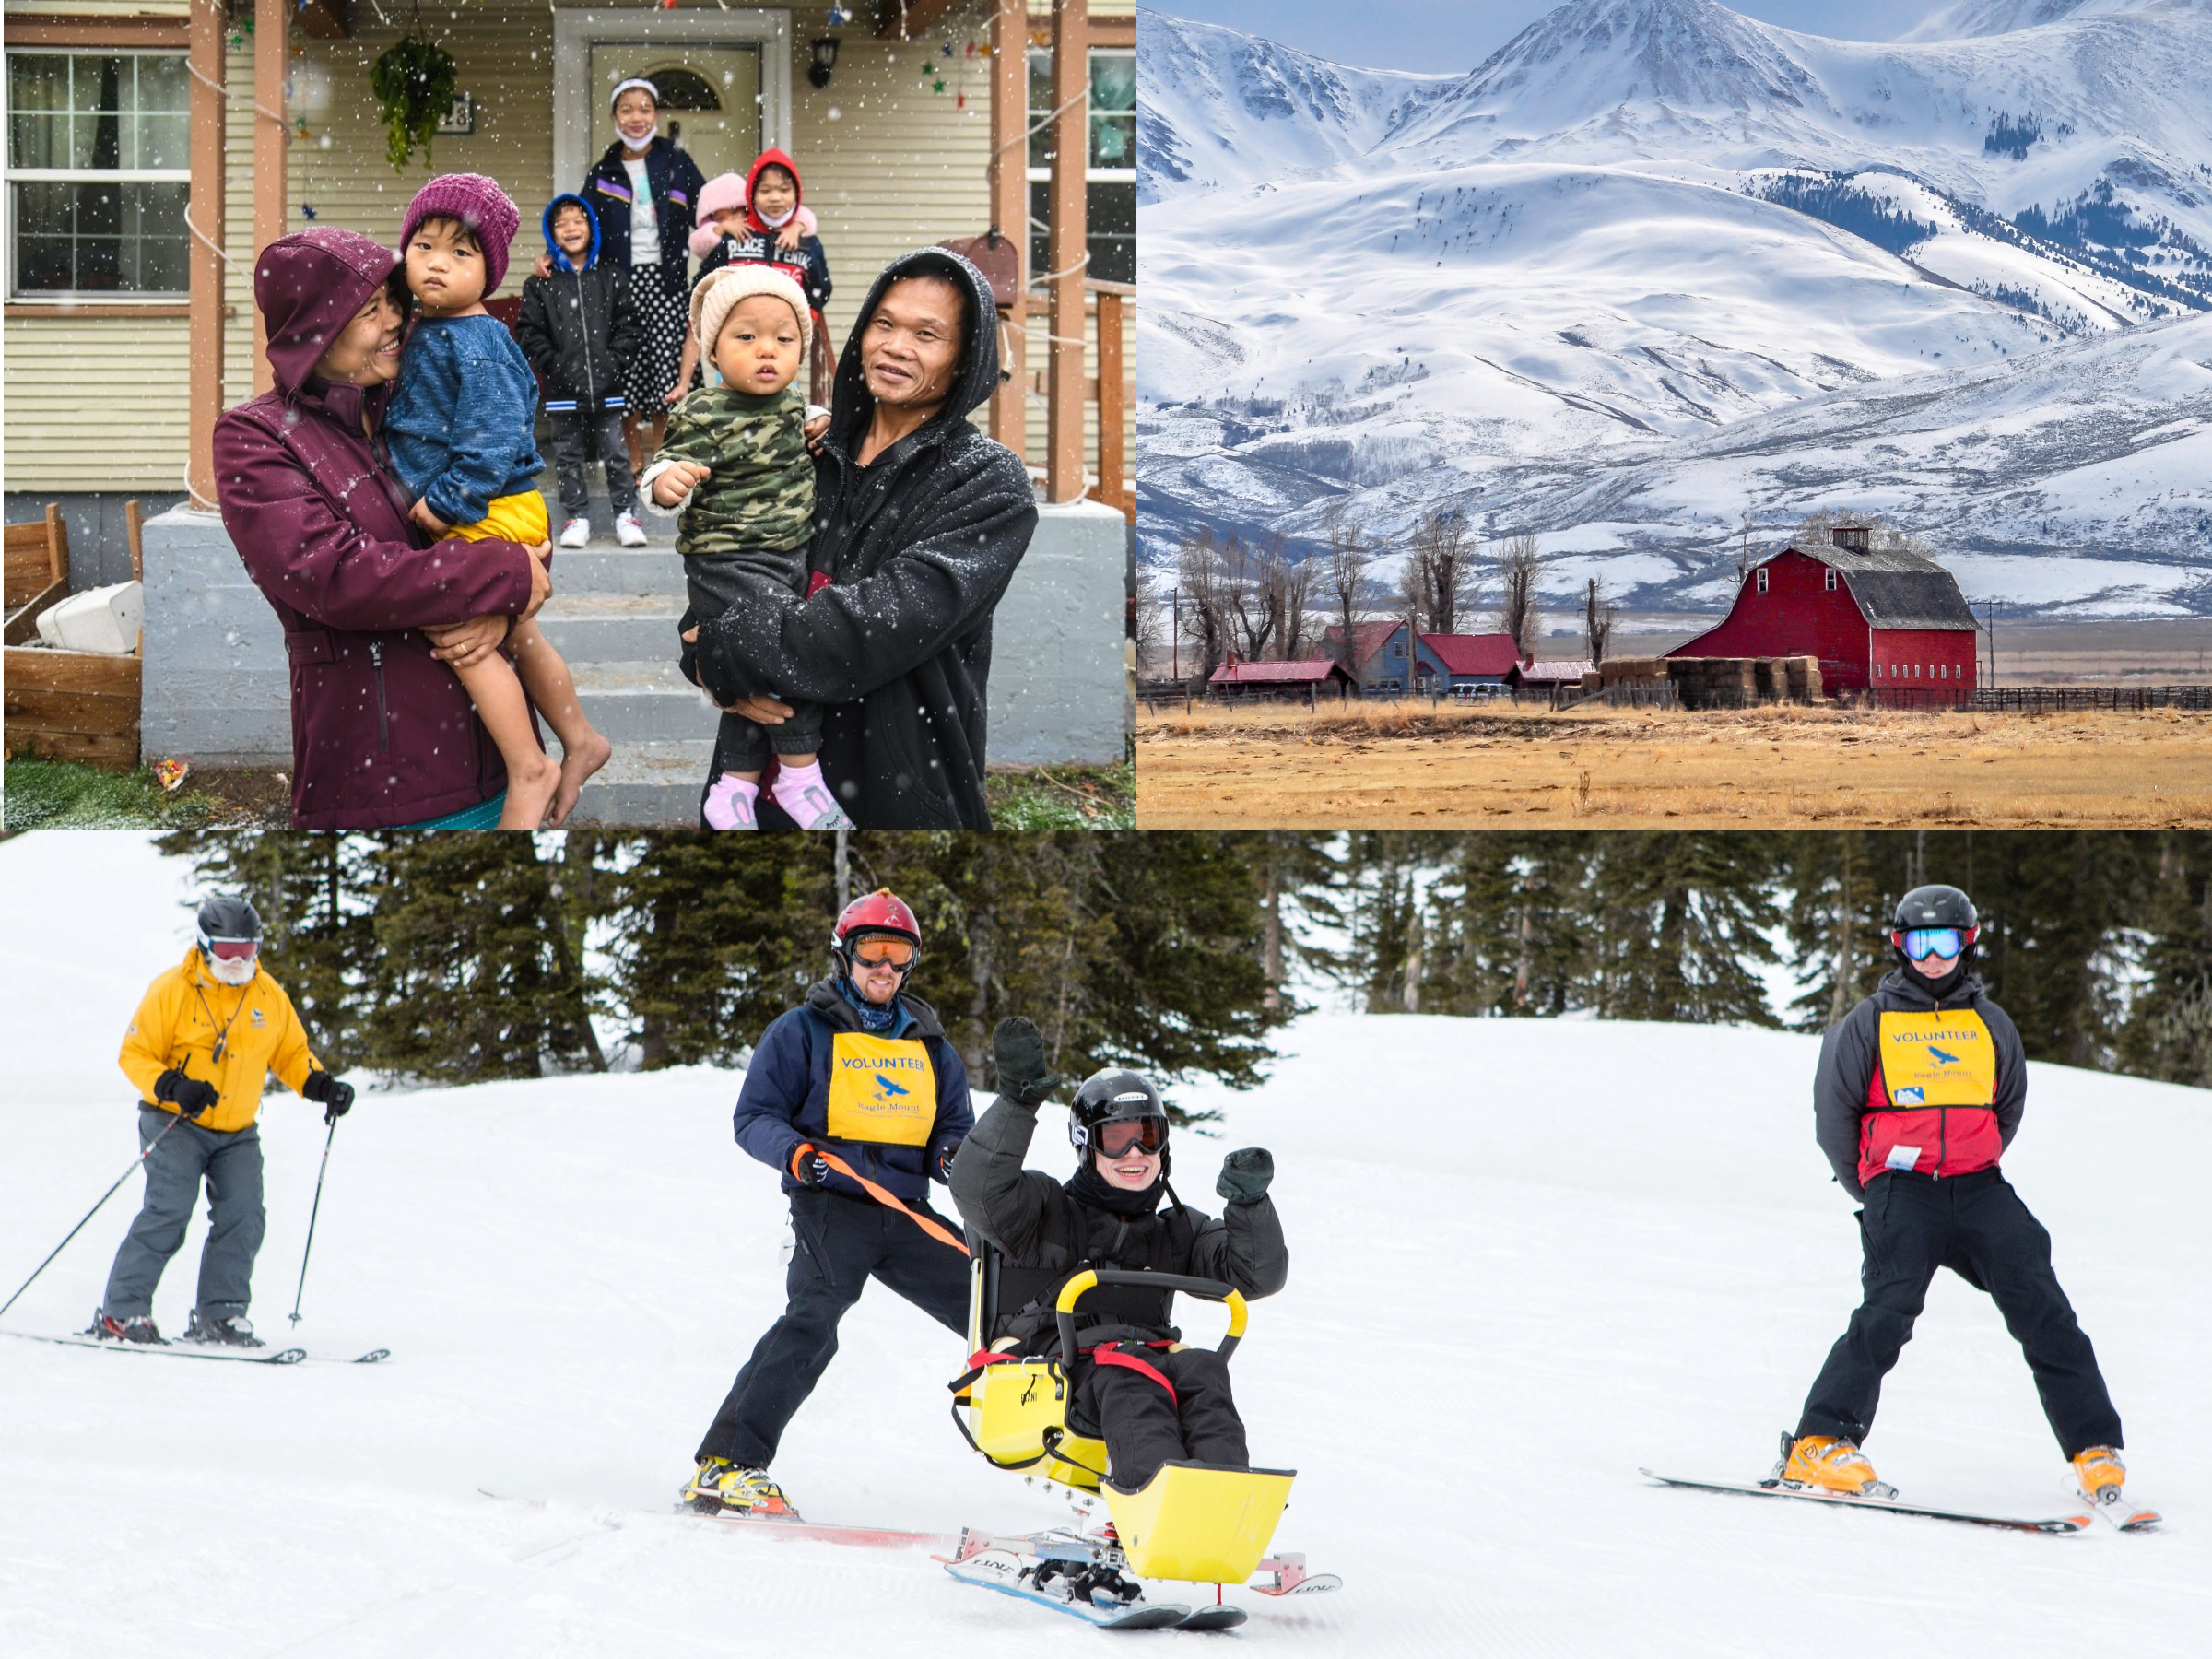 A collage of three photos. Top left is a group of individuals holding children in the snow; top right is a red barn and farm setting with a snowy mountain backdrop; bottom is a group of people doing assisted skiing in the snow